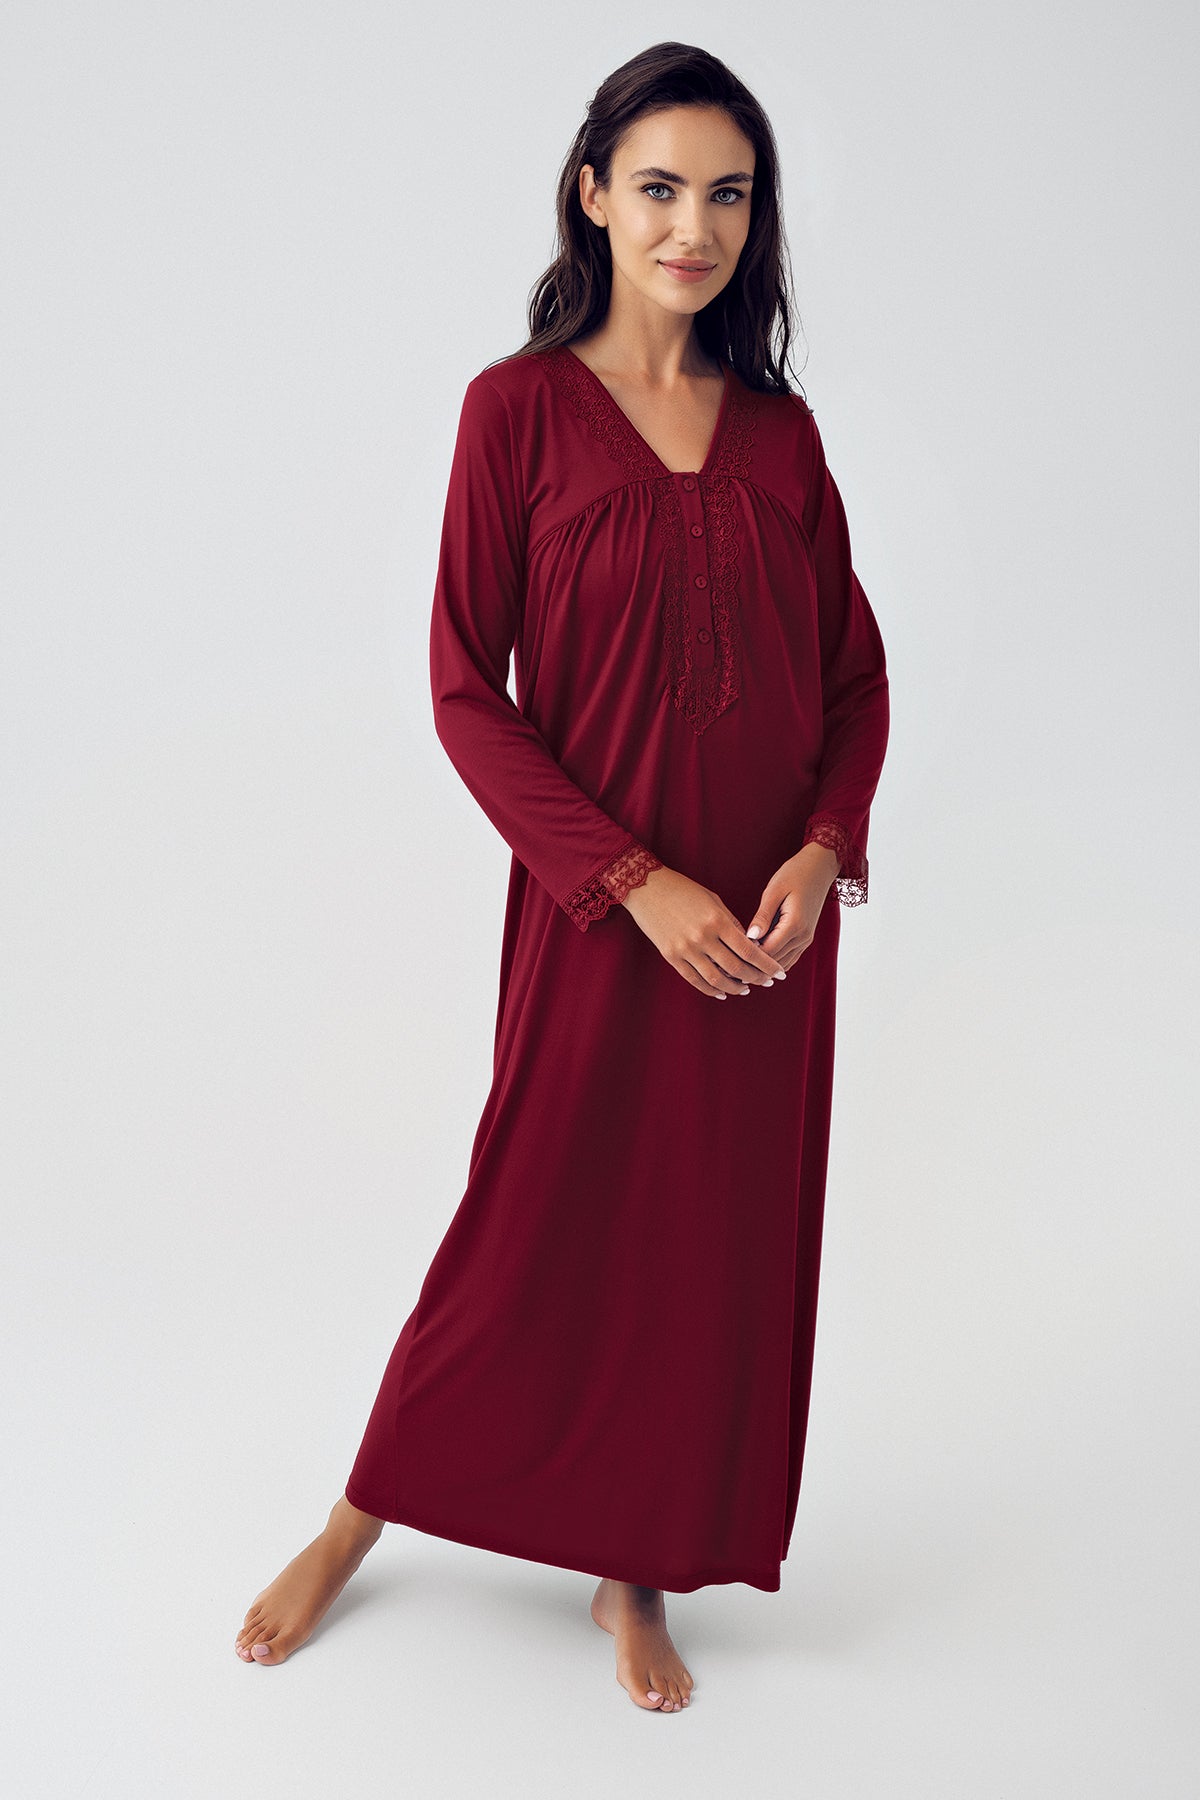 Lace Sleeve Plus Size Maternity & Nursing Nightgown Claret Red - 15120